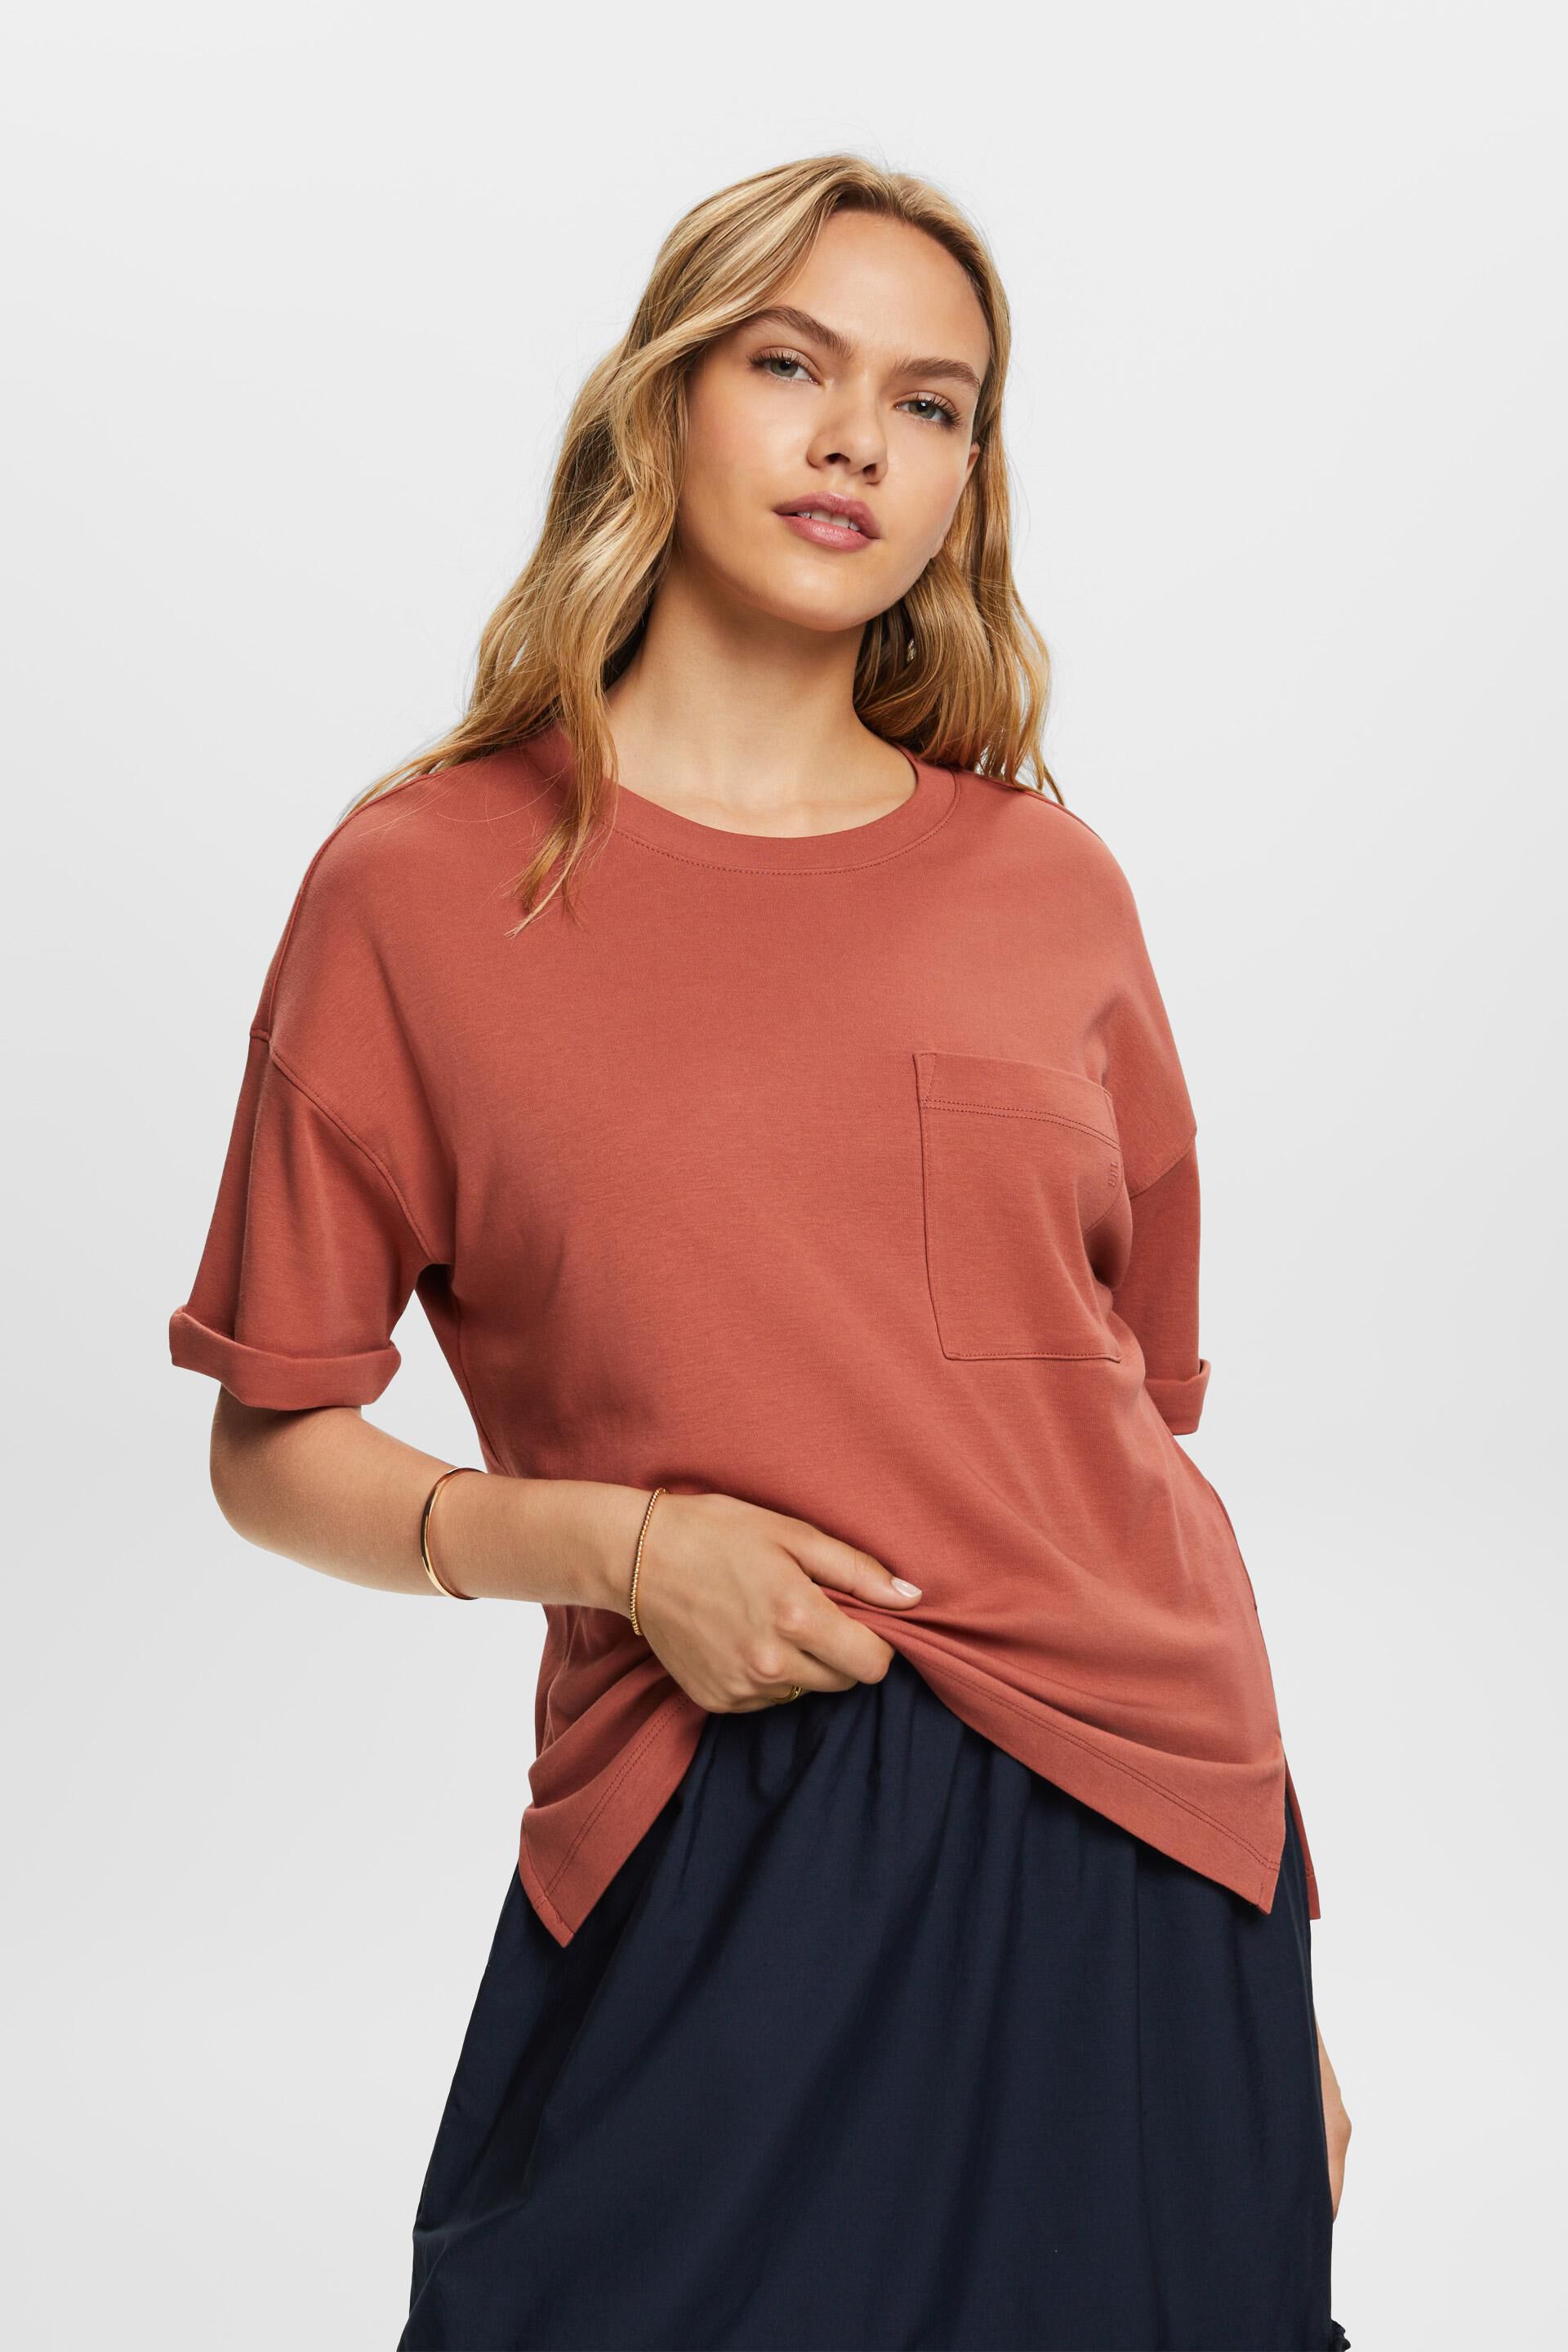 Esprit patch pocket with Oversized a t-shirt